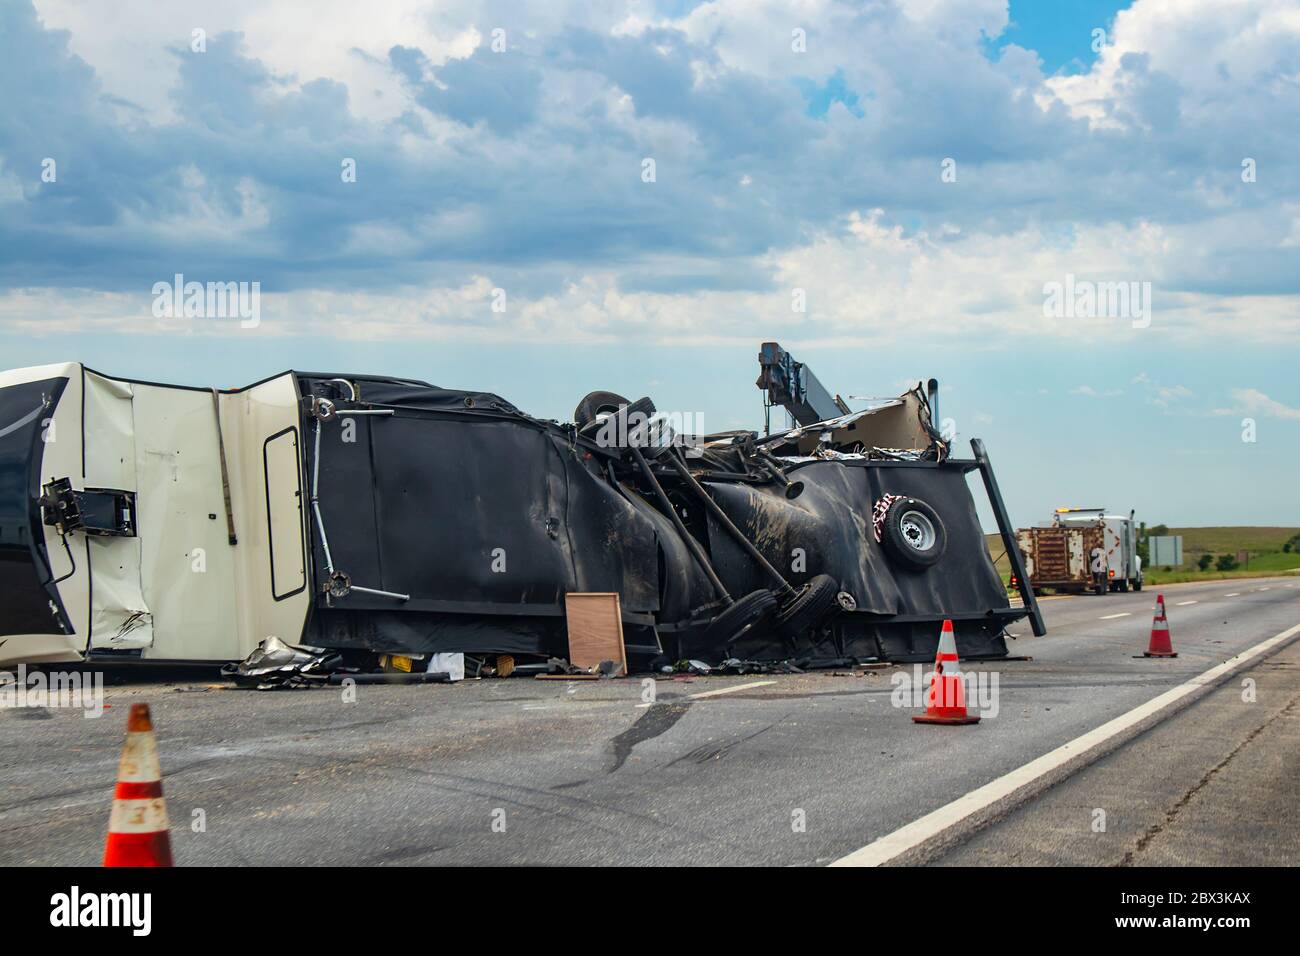 Fifth wheel Recreational Vehicle overturned on a highway with the underside torn up and things spilling out into the roadway after an accident Stock Photo